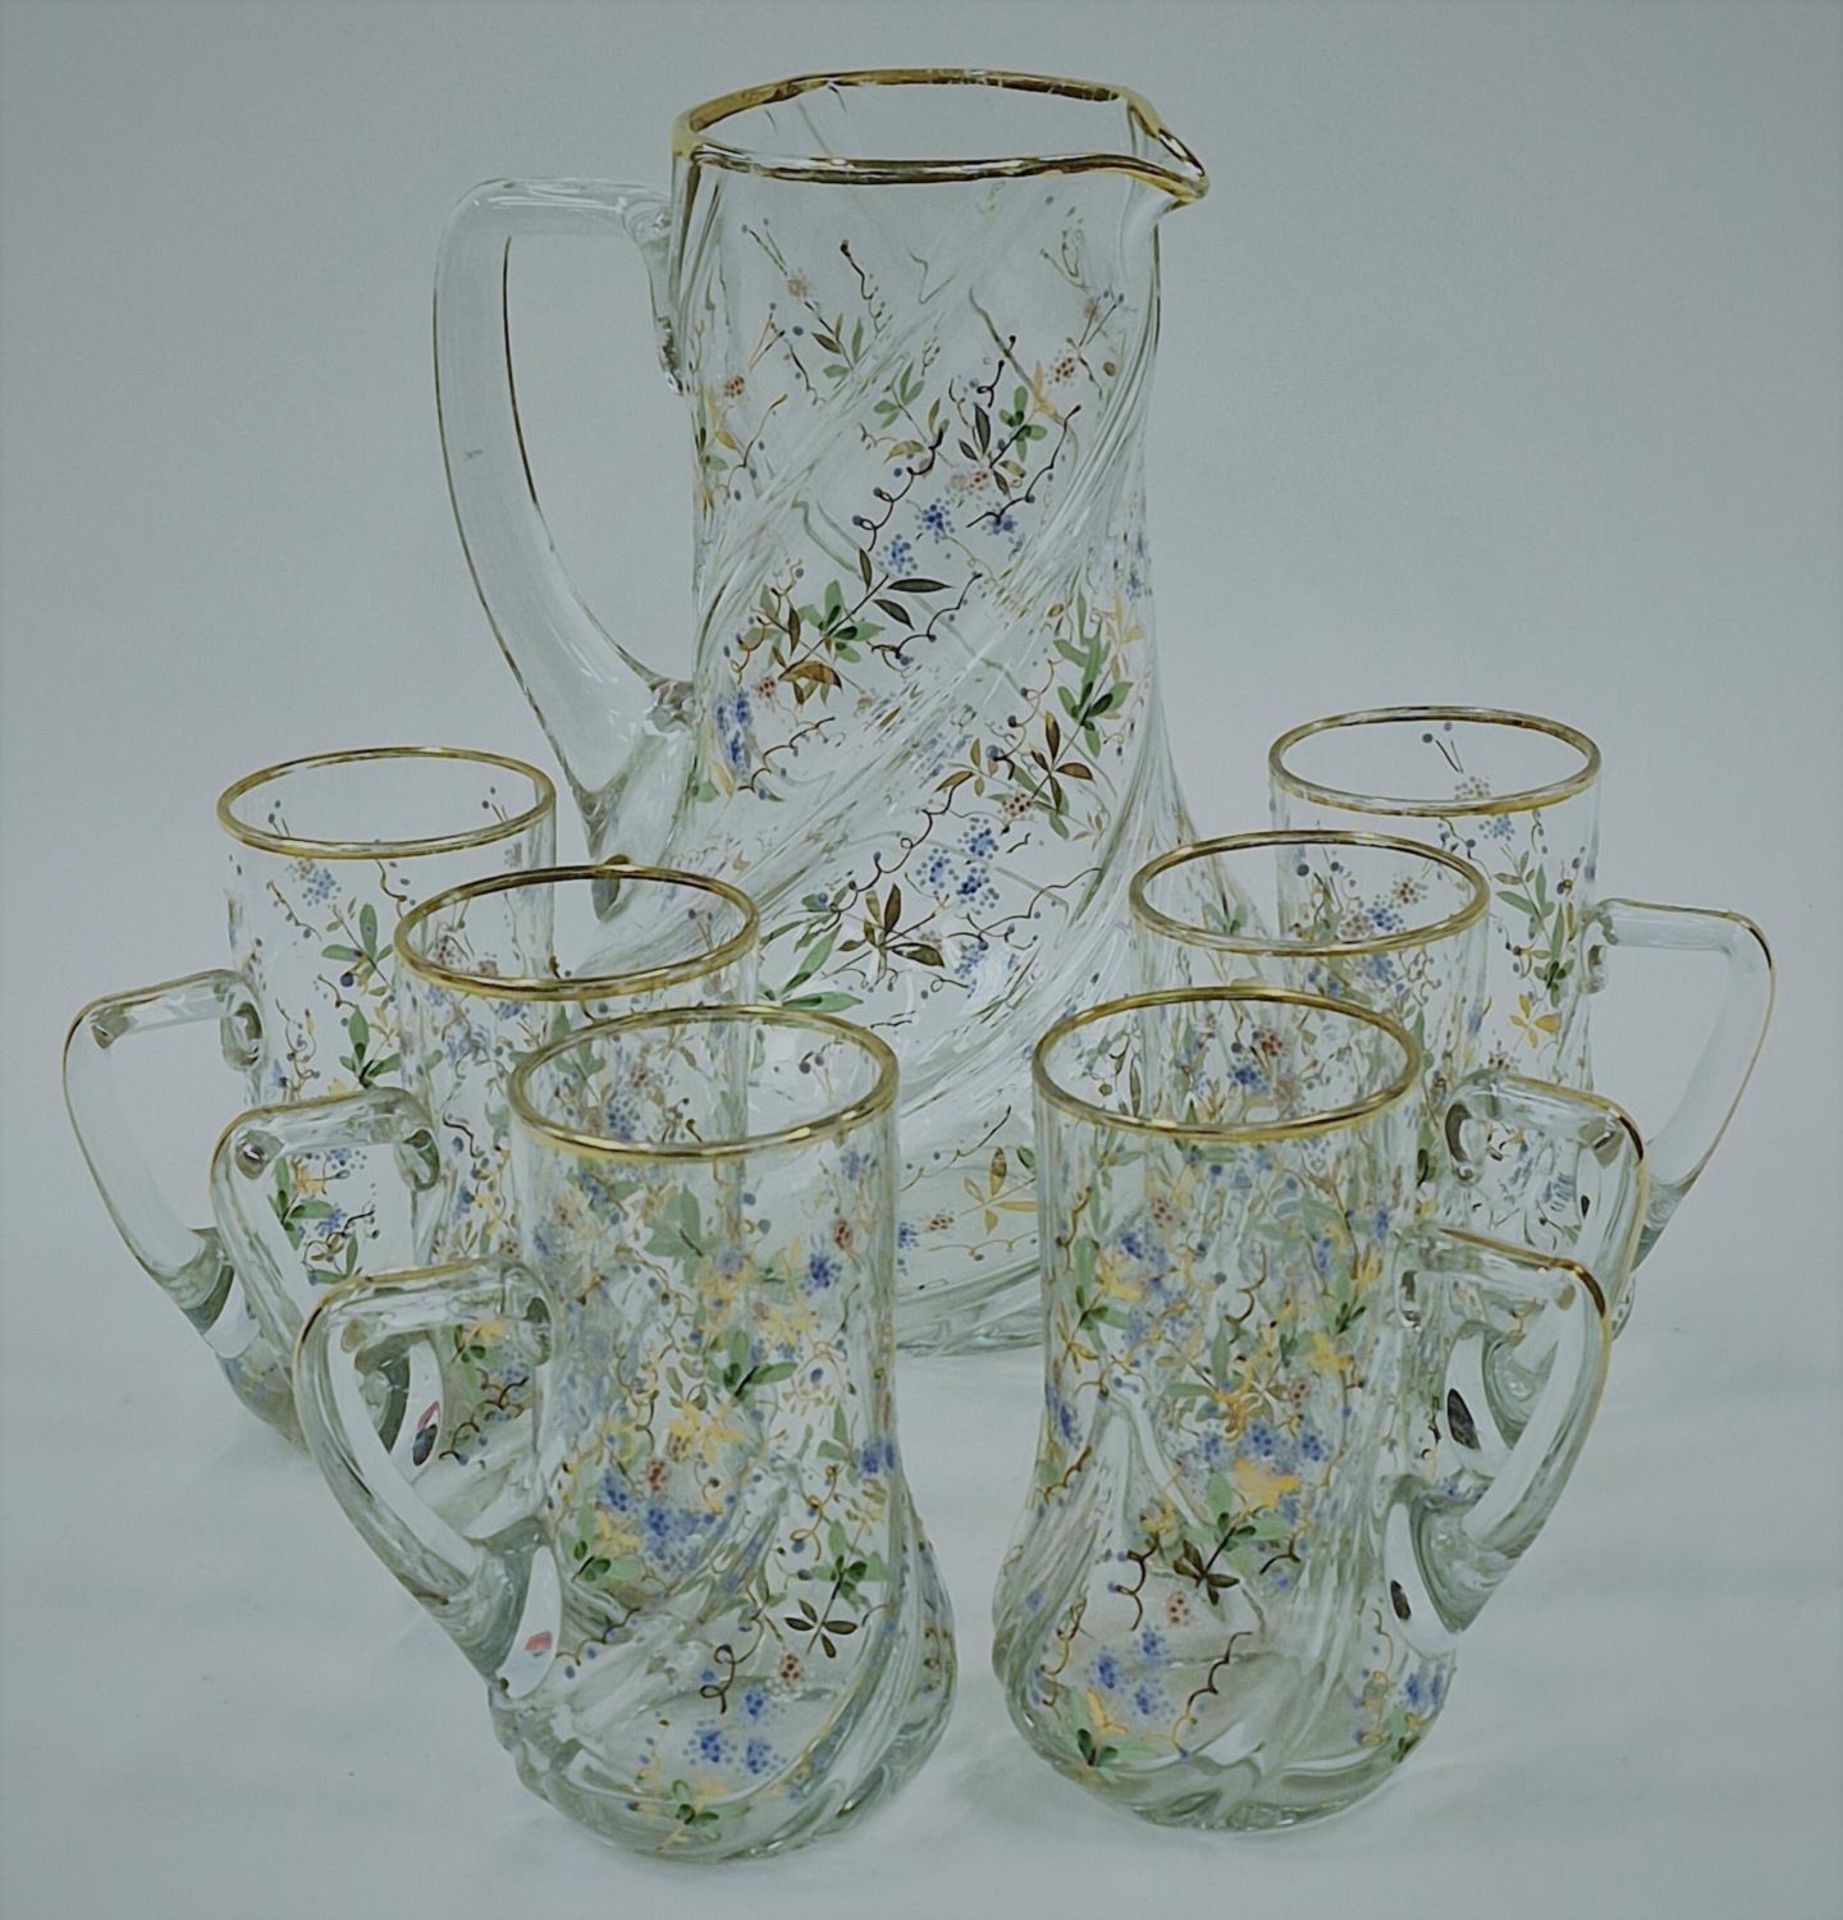 Vintage French mid 20th Century glass lemonade/drink set to include pitcher and six glasses with